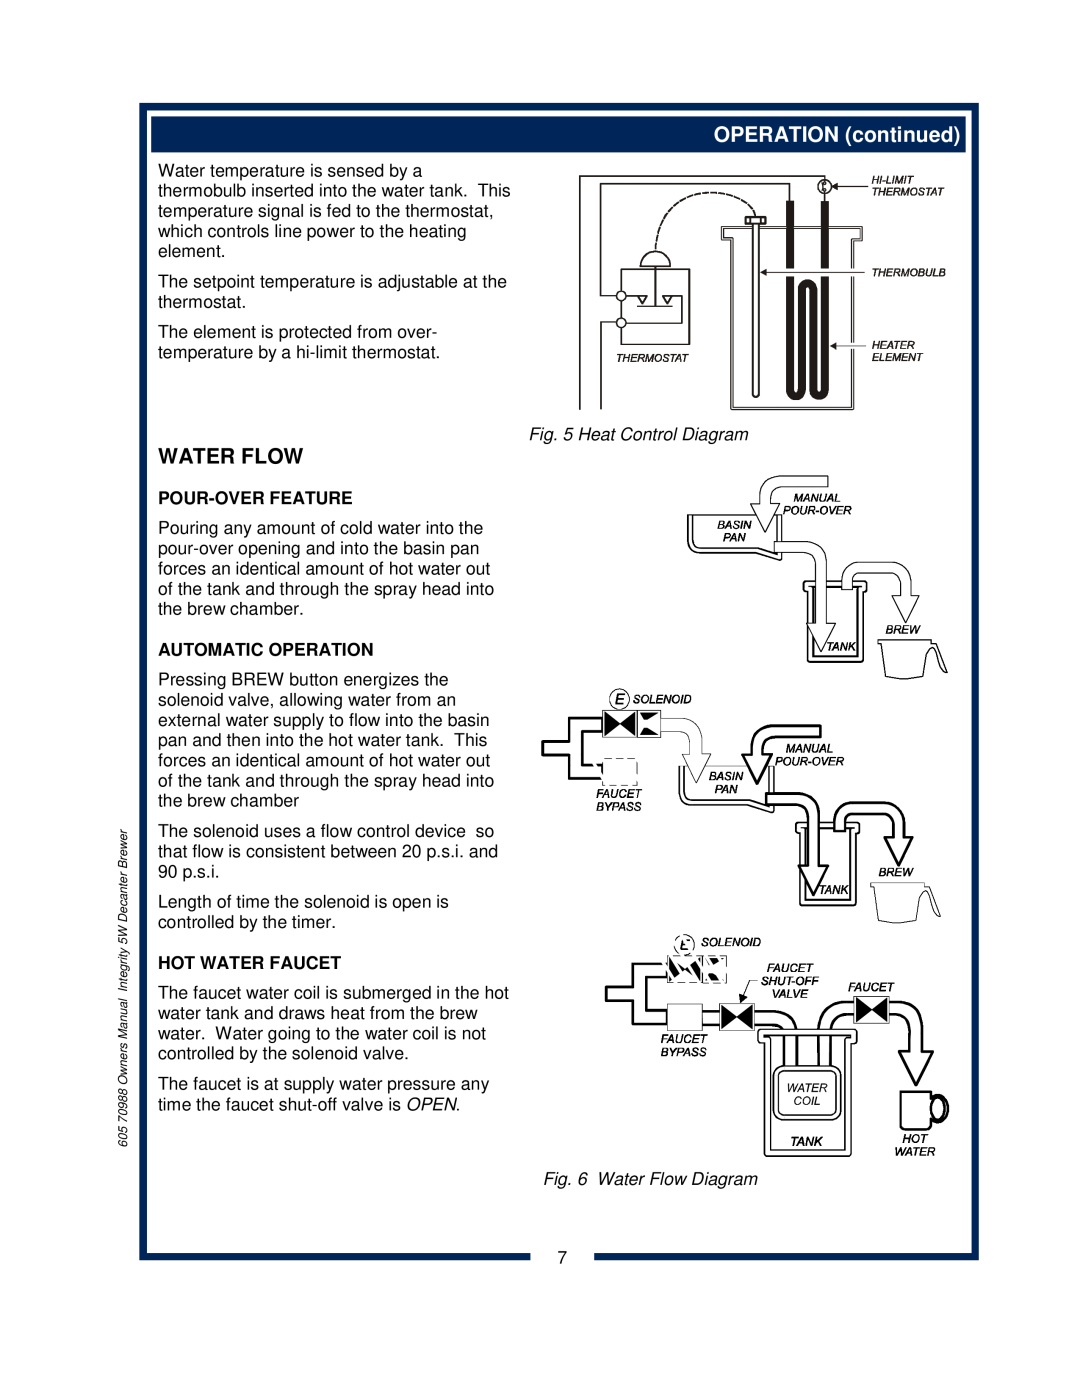 Bloomfield 8752 owner manual OPERATION continued, Water Flow, Heat Control Diagram, Pour-Over Feature, Automatic Operation 